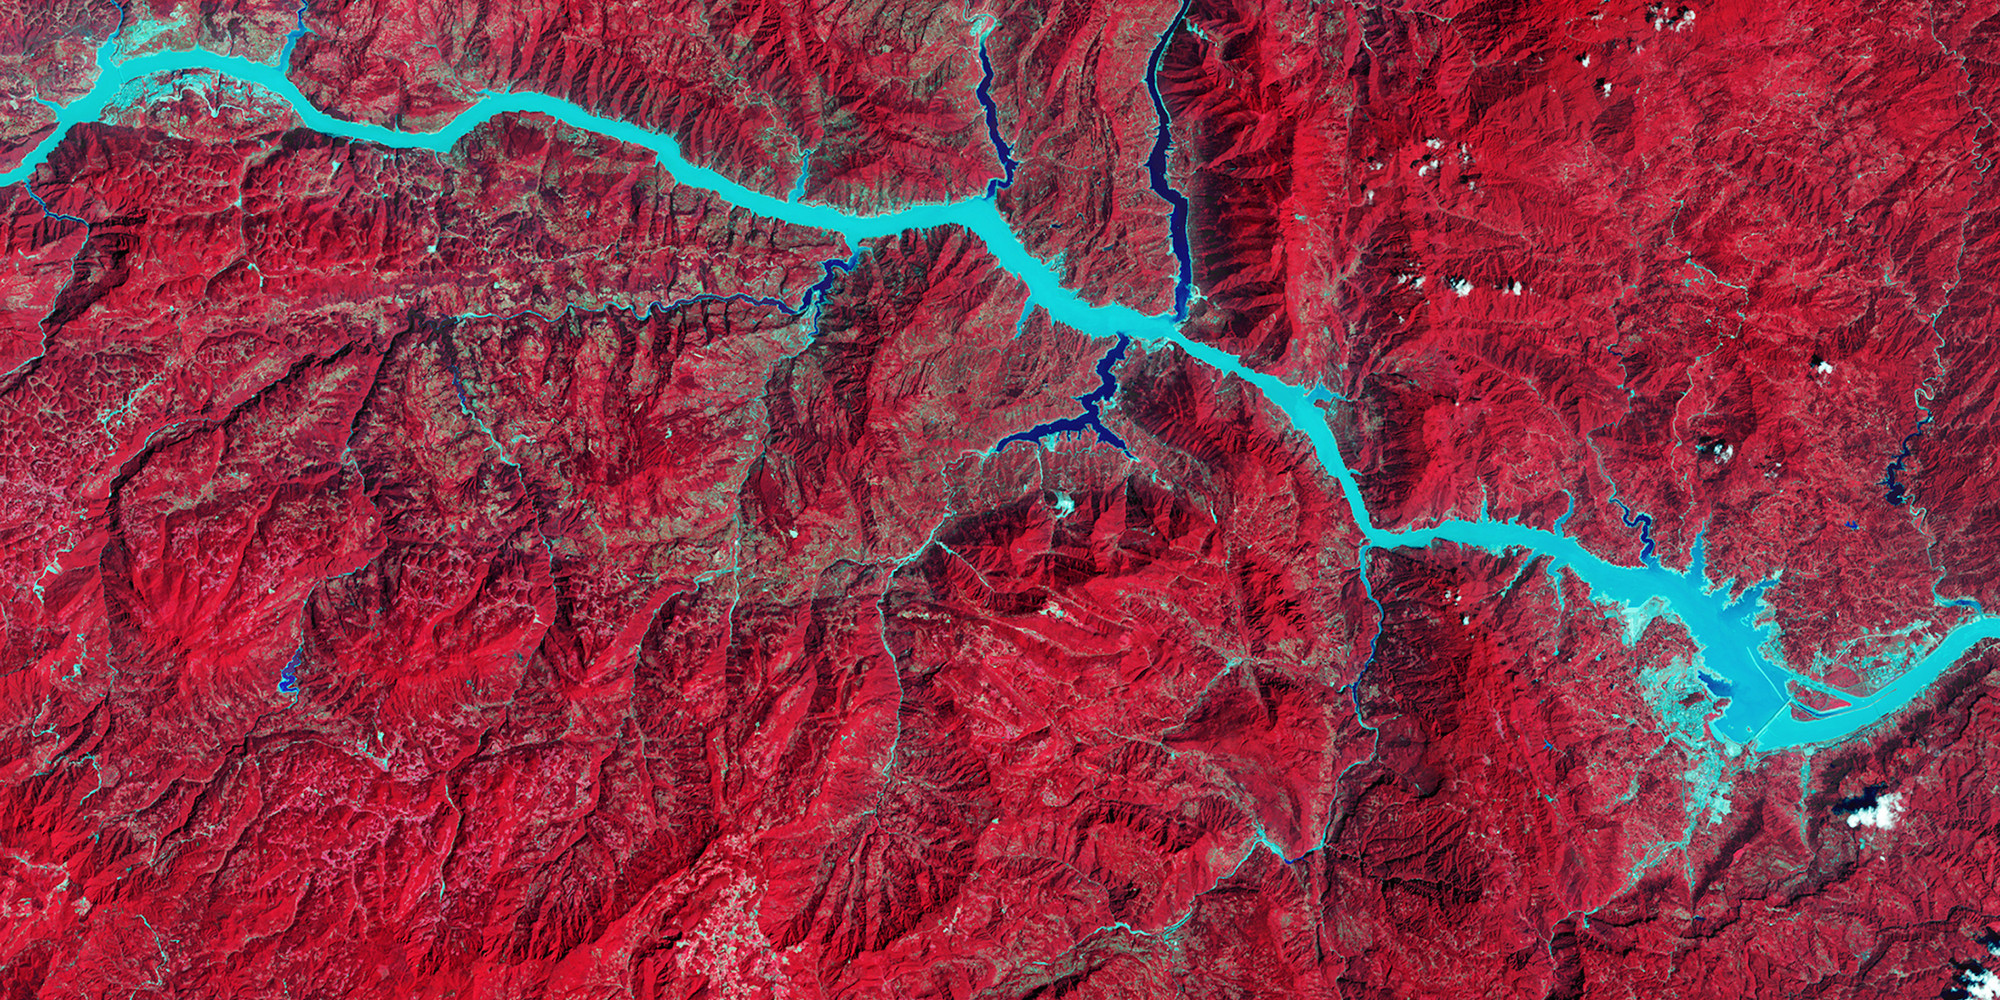 NASA. Images of Change. Three Gorges Dam, central China. August 22, 2016. Courtesy NASA